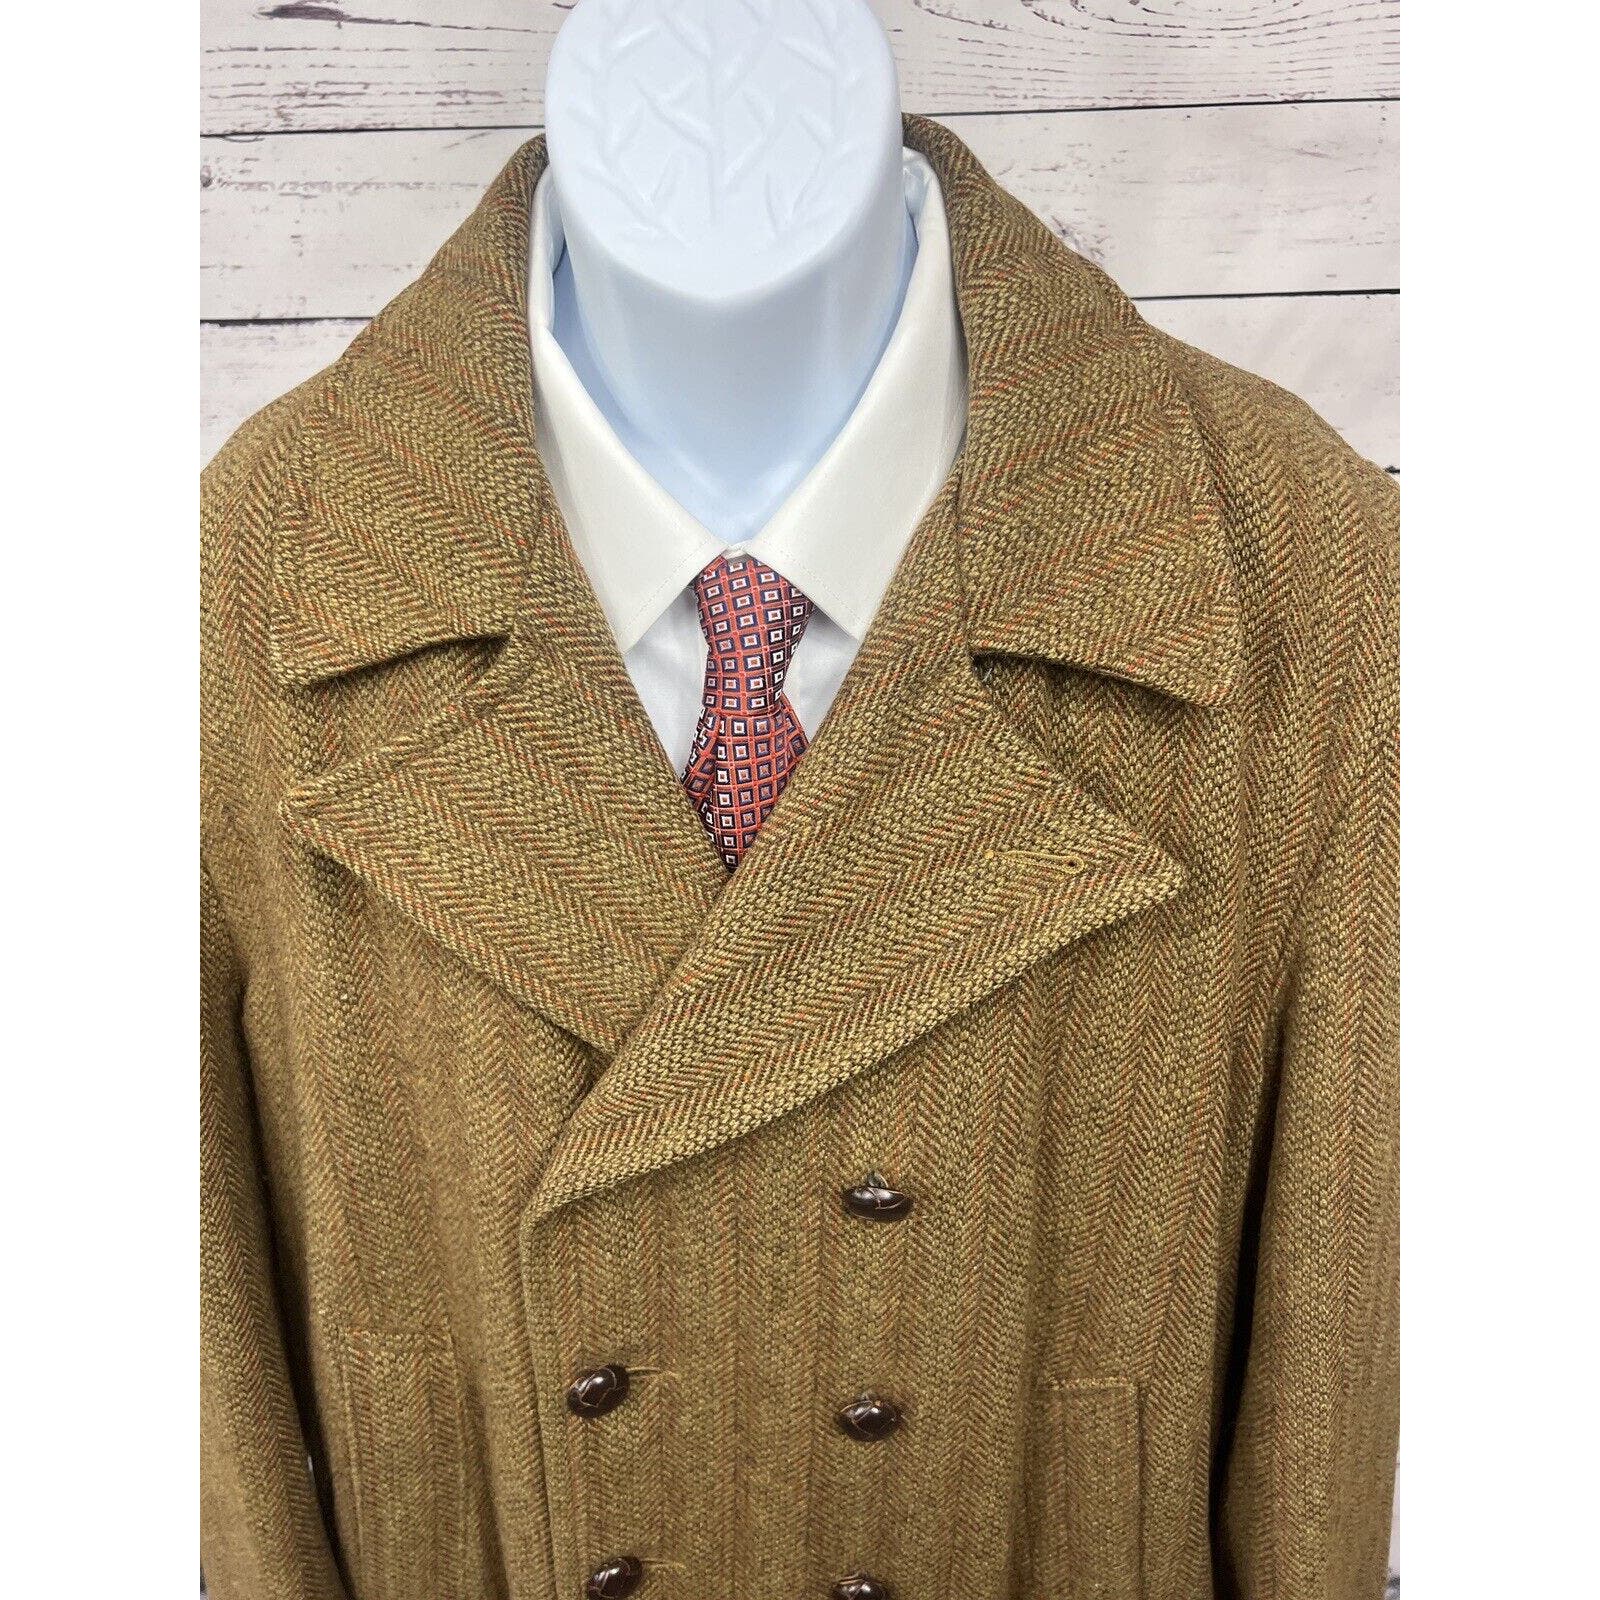 Shanhouse Tweed Overcoat Men’s 46 Faux Fur Lined Double Breasted Vintage